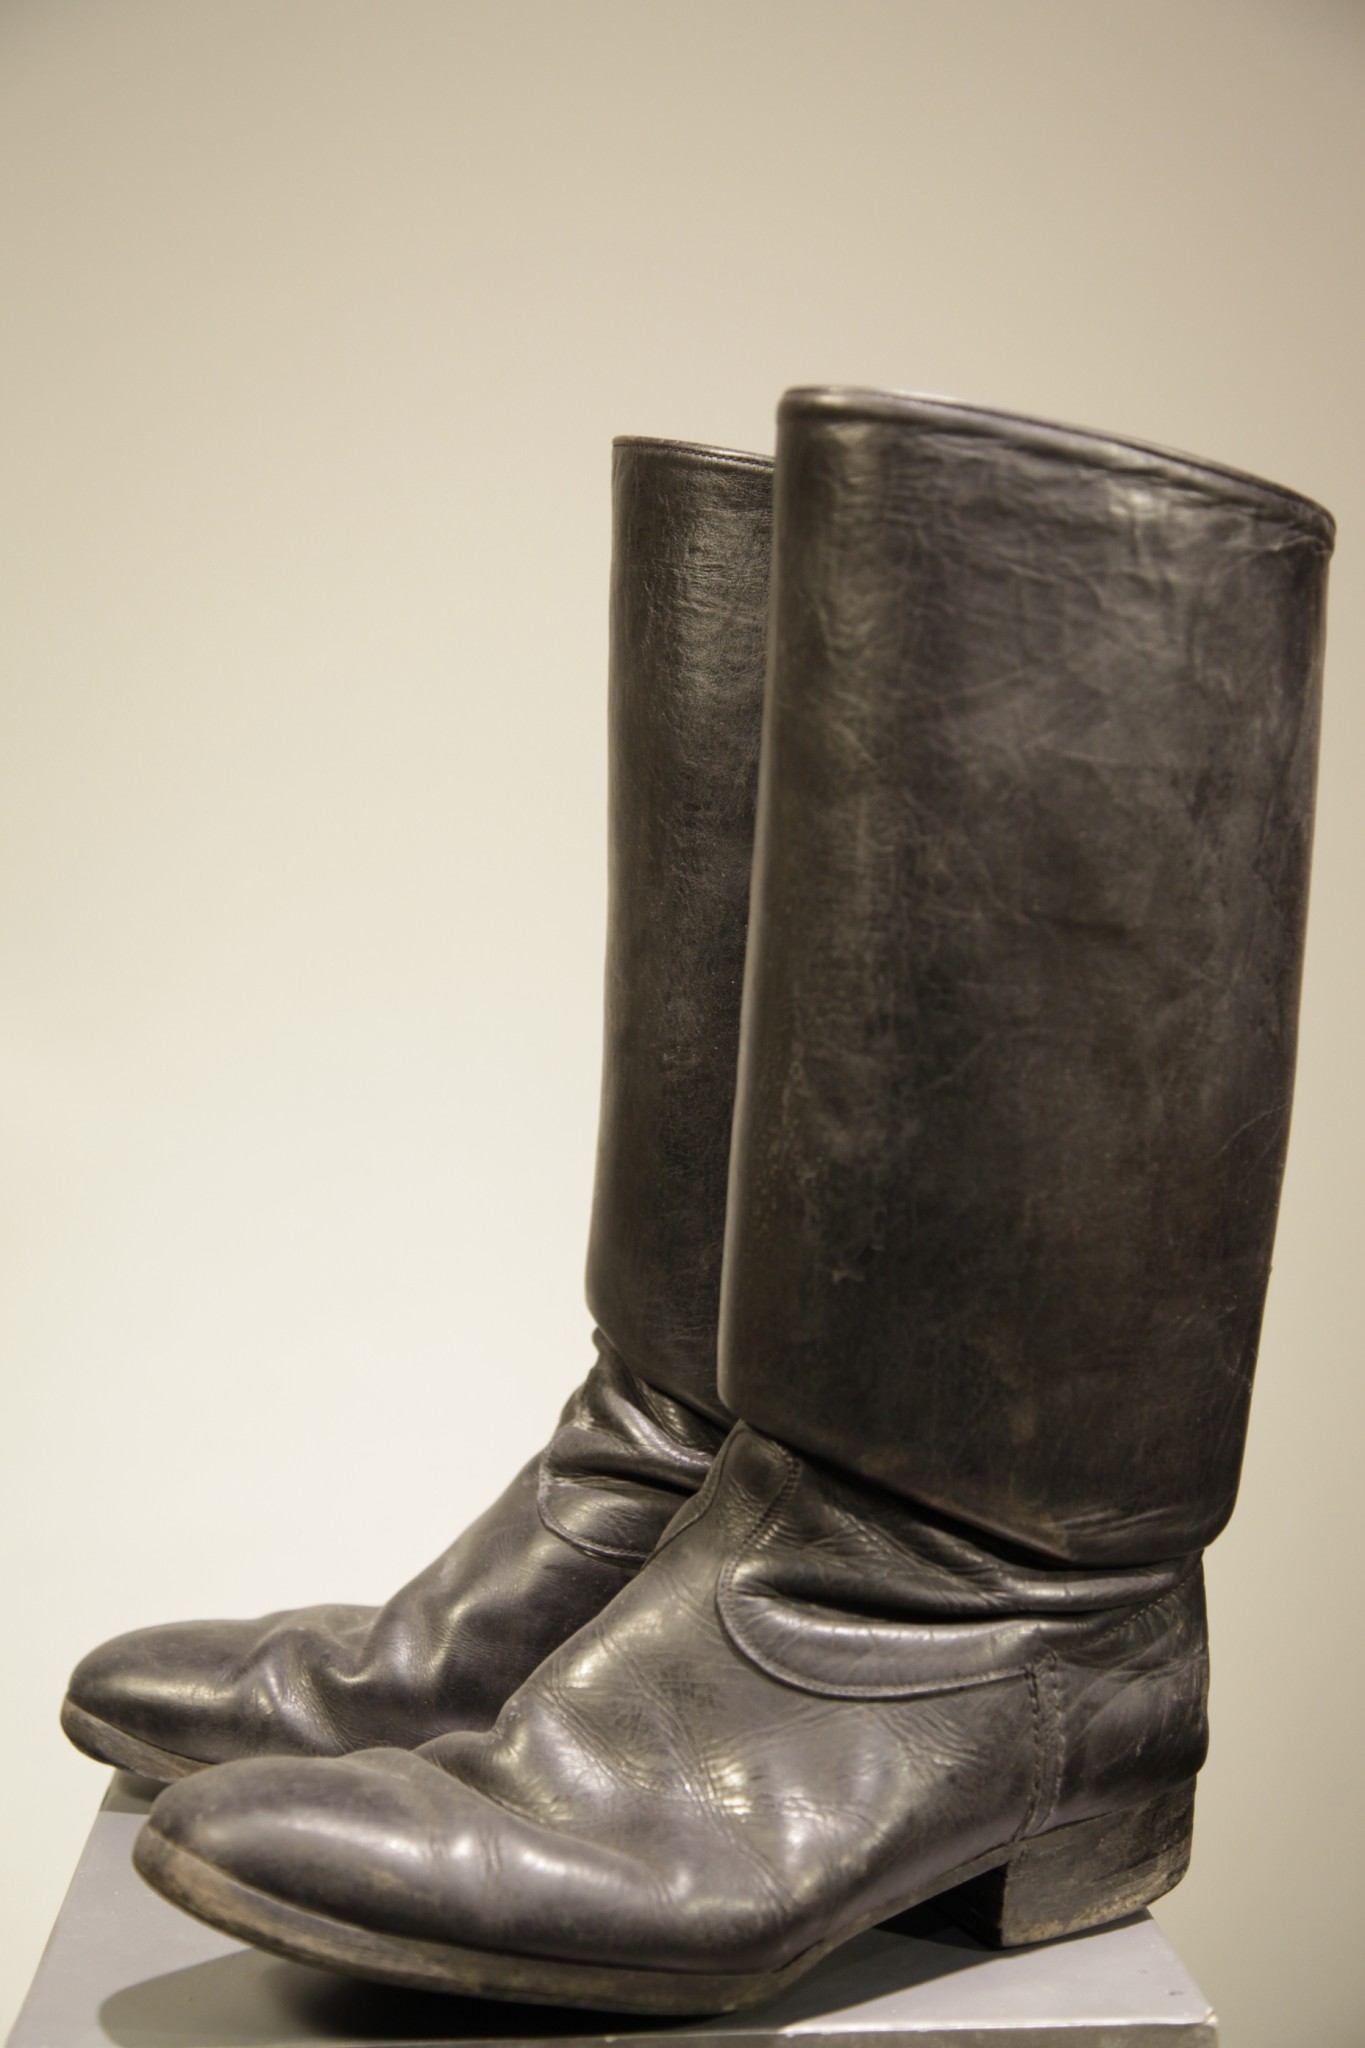 Officer's boots (2 world) - Props, costumes, locations and retro cars ...